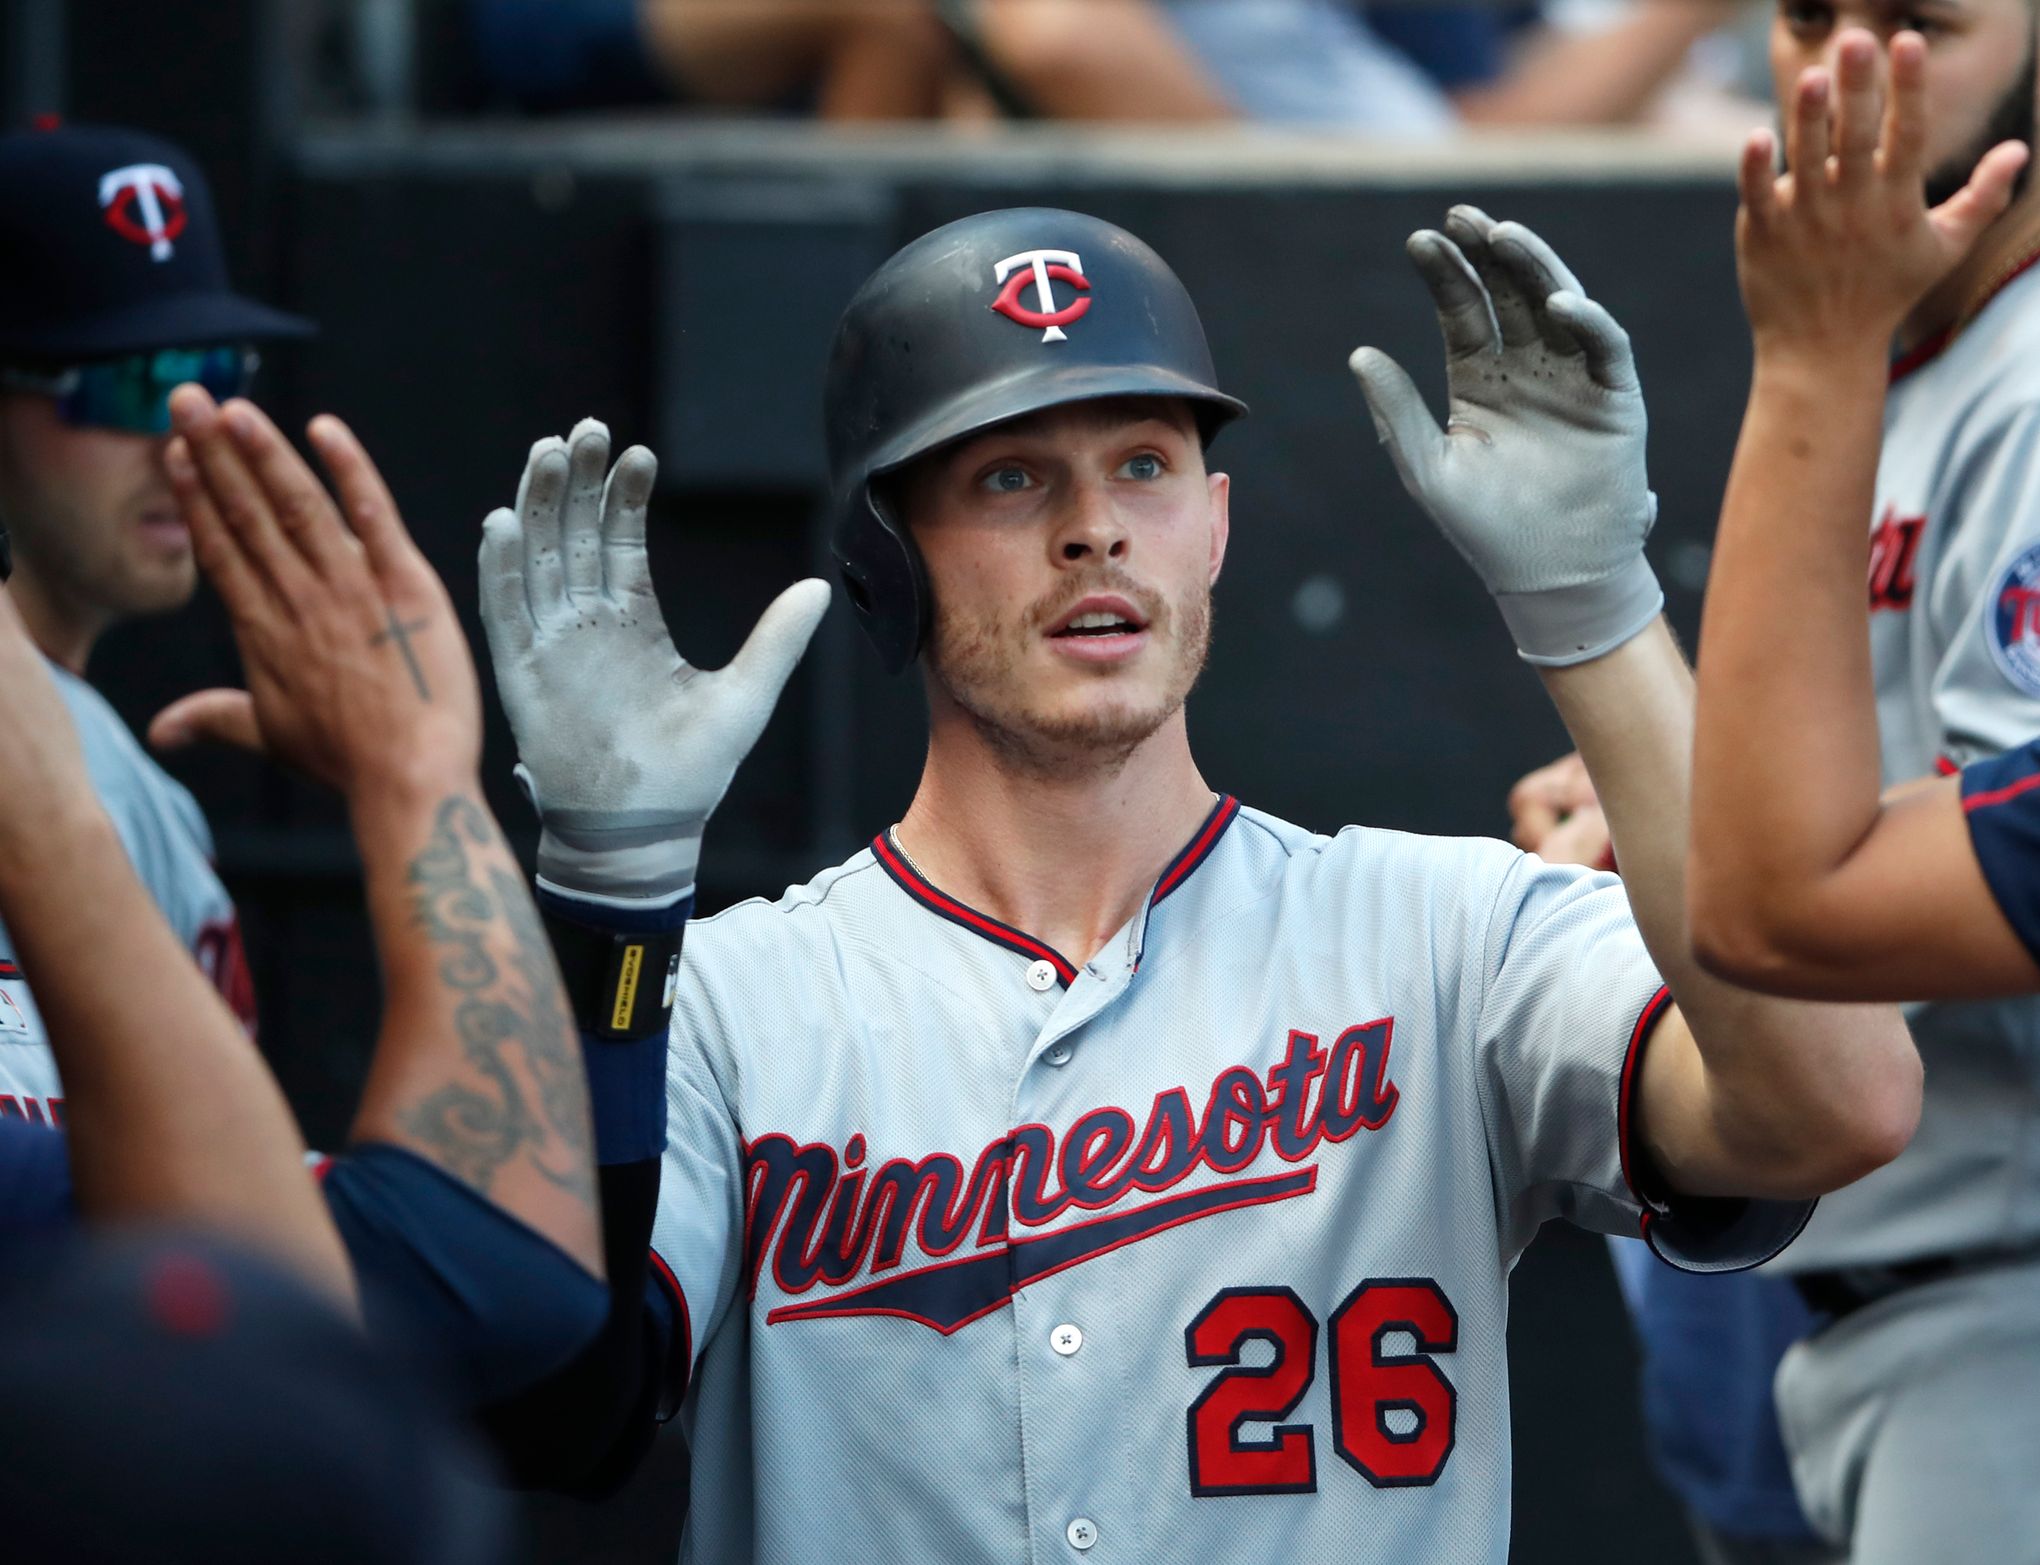 SWEET SIXTEEN: Nelson Cruz vs Max Kepler, who do you think is the